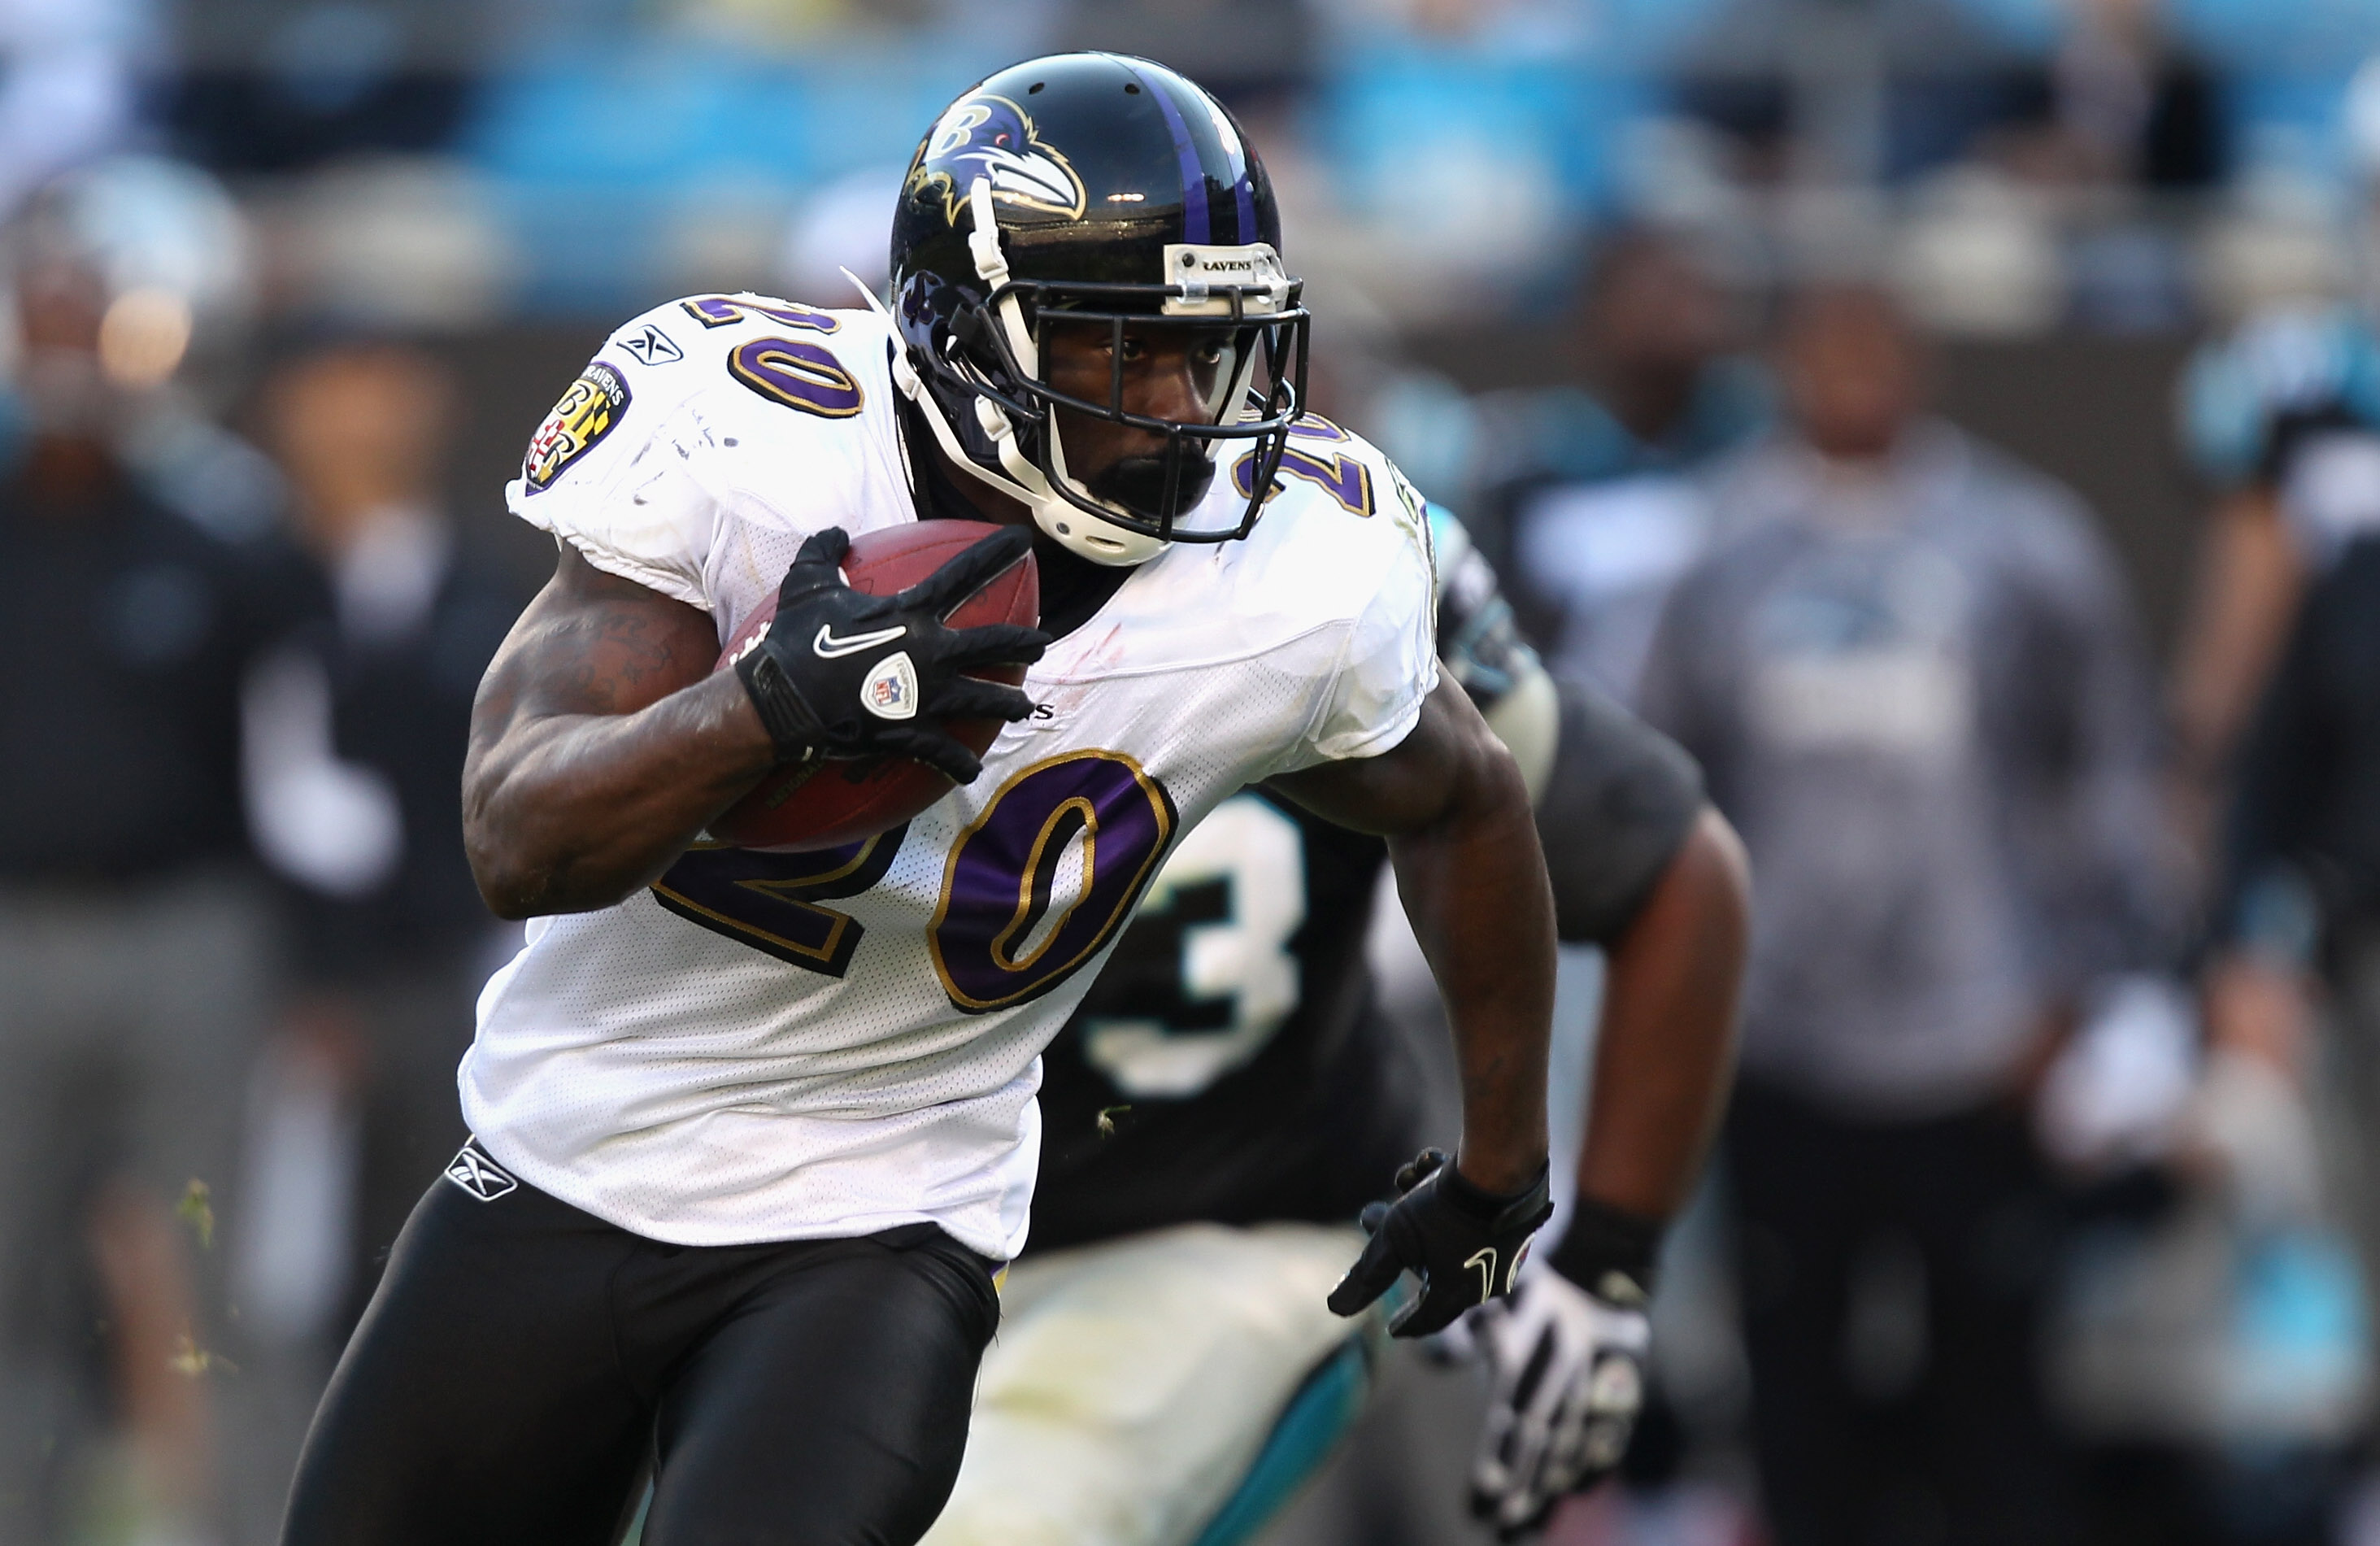 Ed Reed's Hall of Fame resume: Baltimore Ravens great will learn